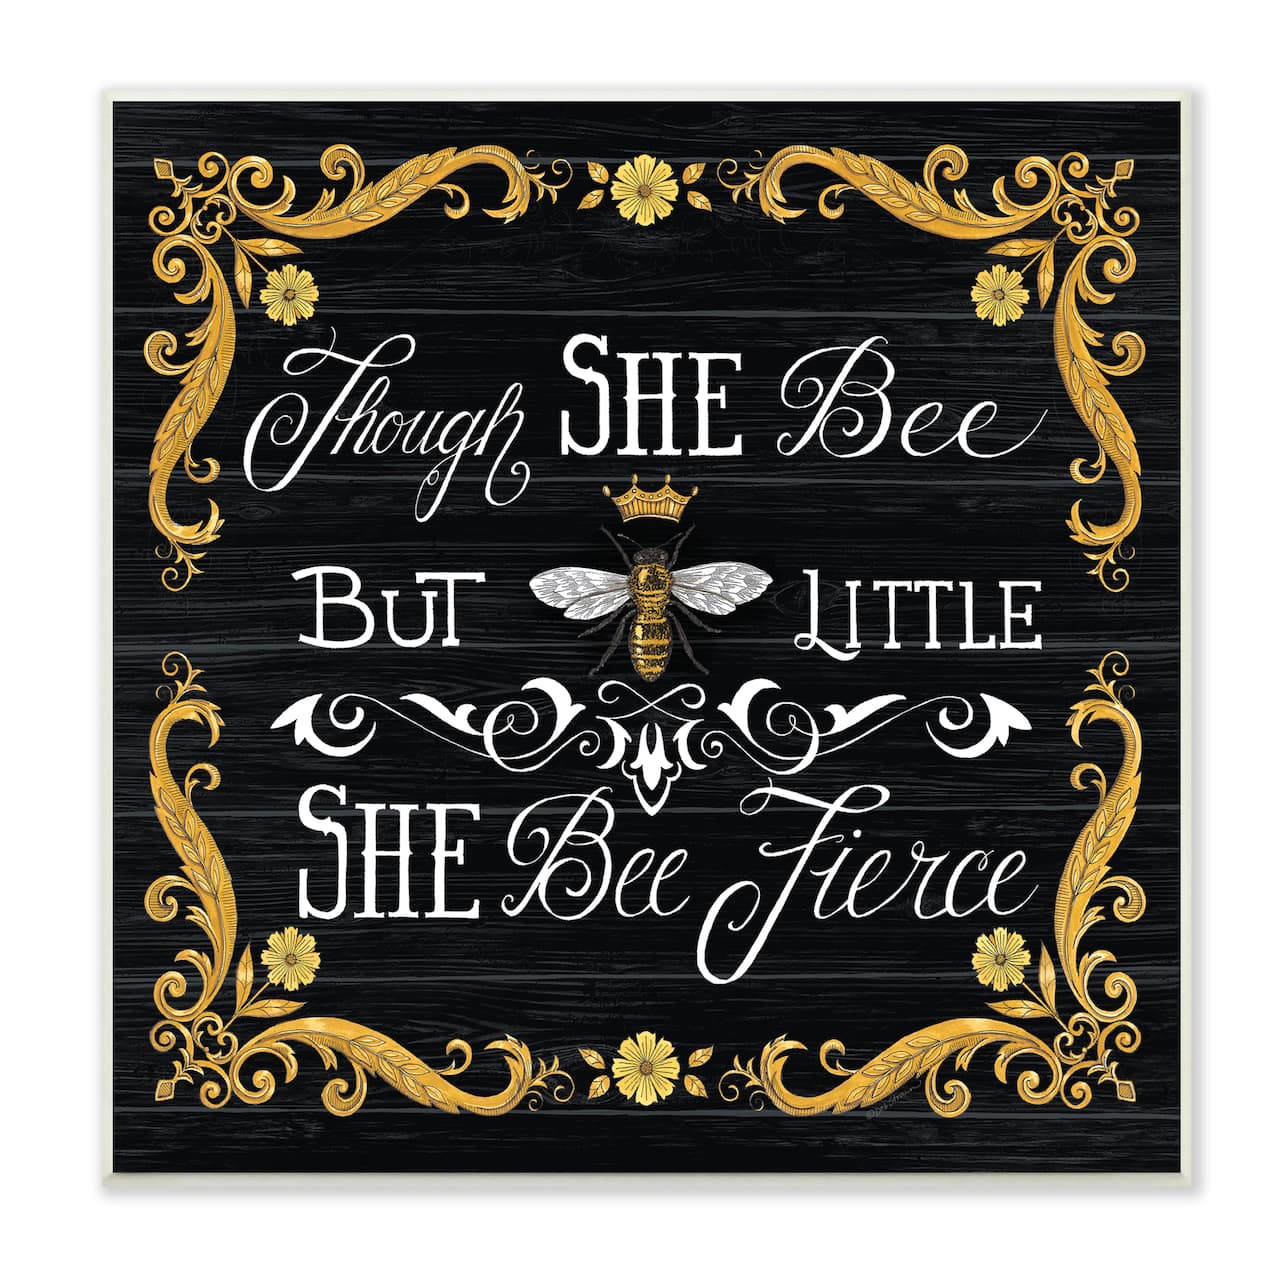 Stupell Industries She Bee Fierce Female Motivational Phrase Vintage Pun Wood Wall Plaque